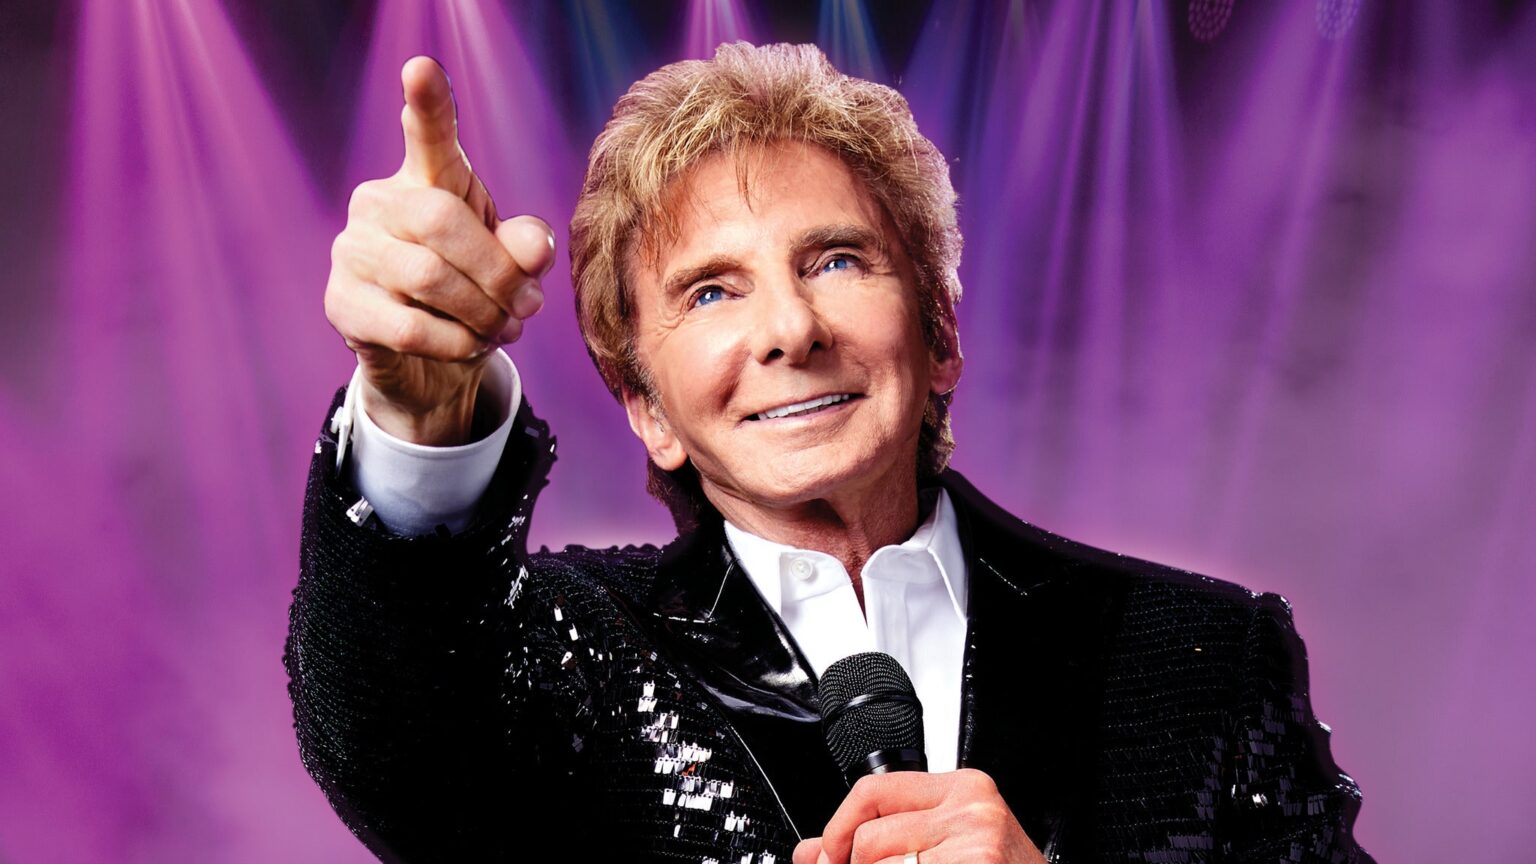 Barry Manilow Our Glasgow